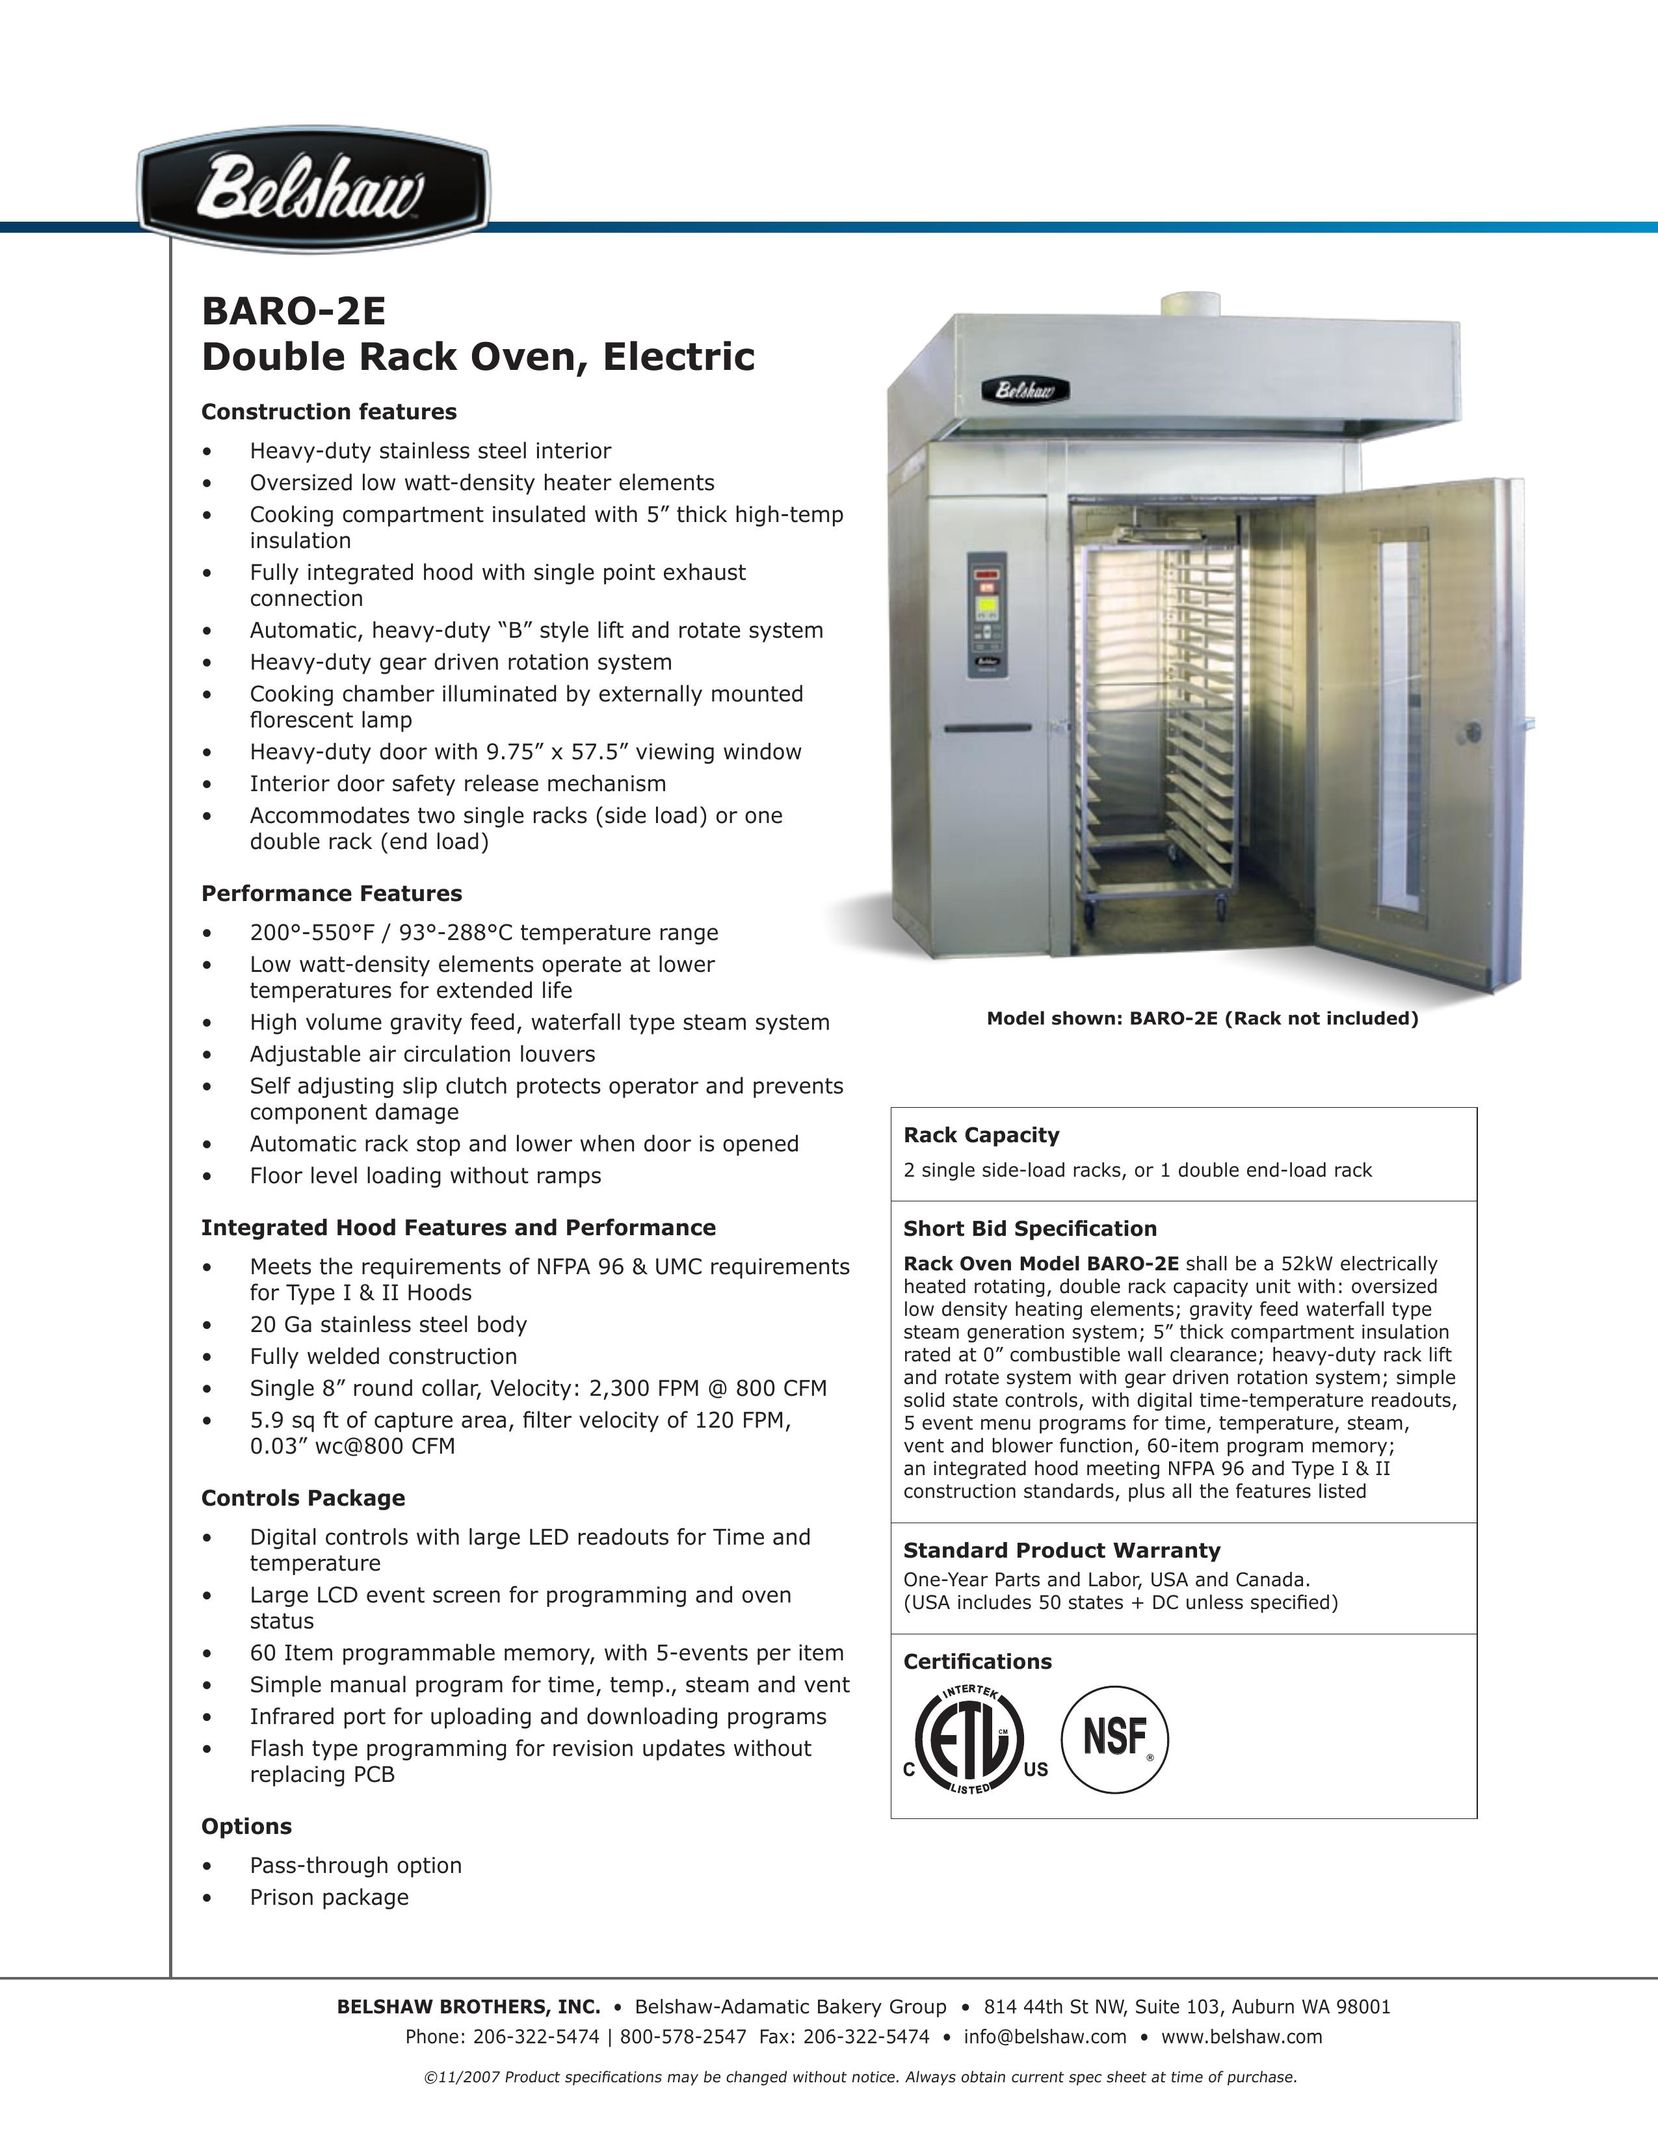 Belshaw Brothers BARO-2E Oven User Manual